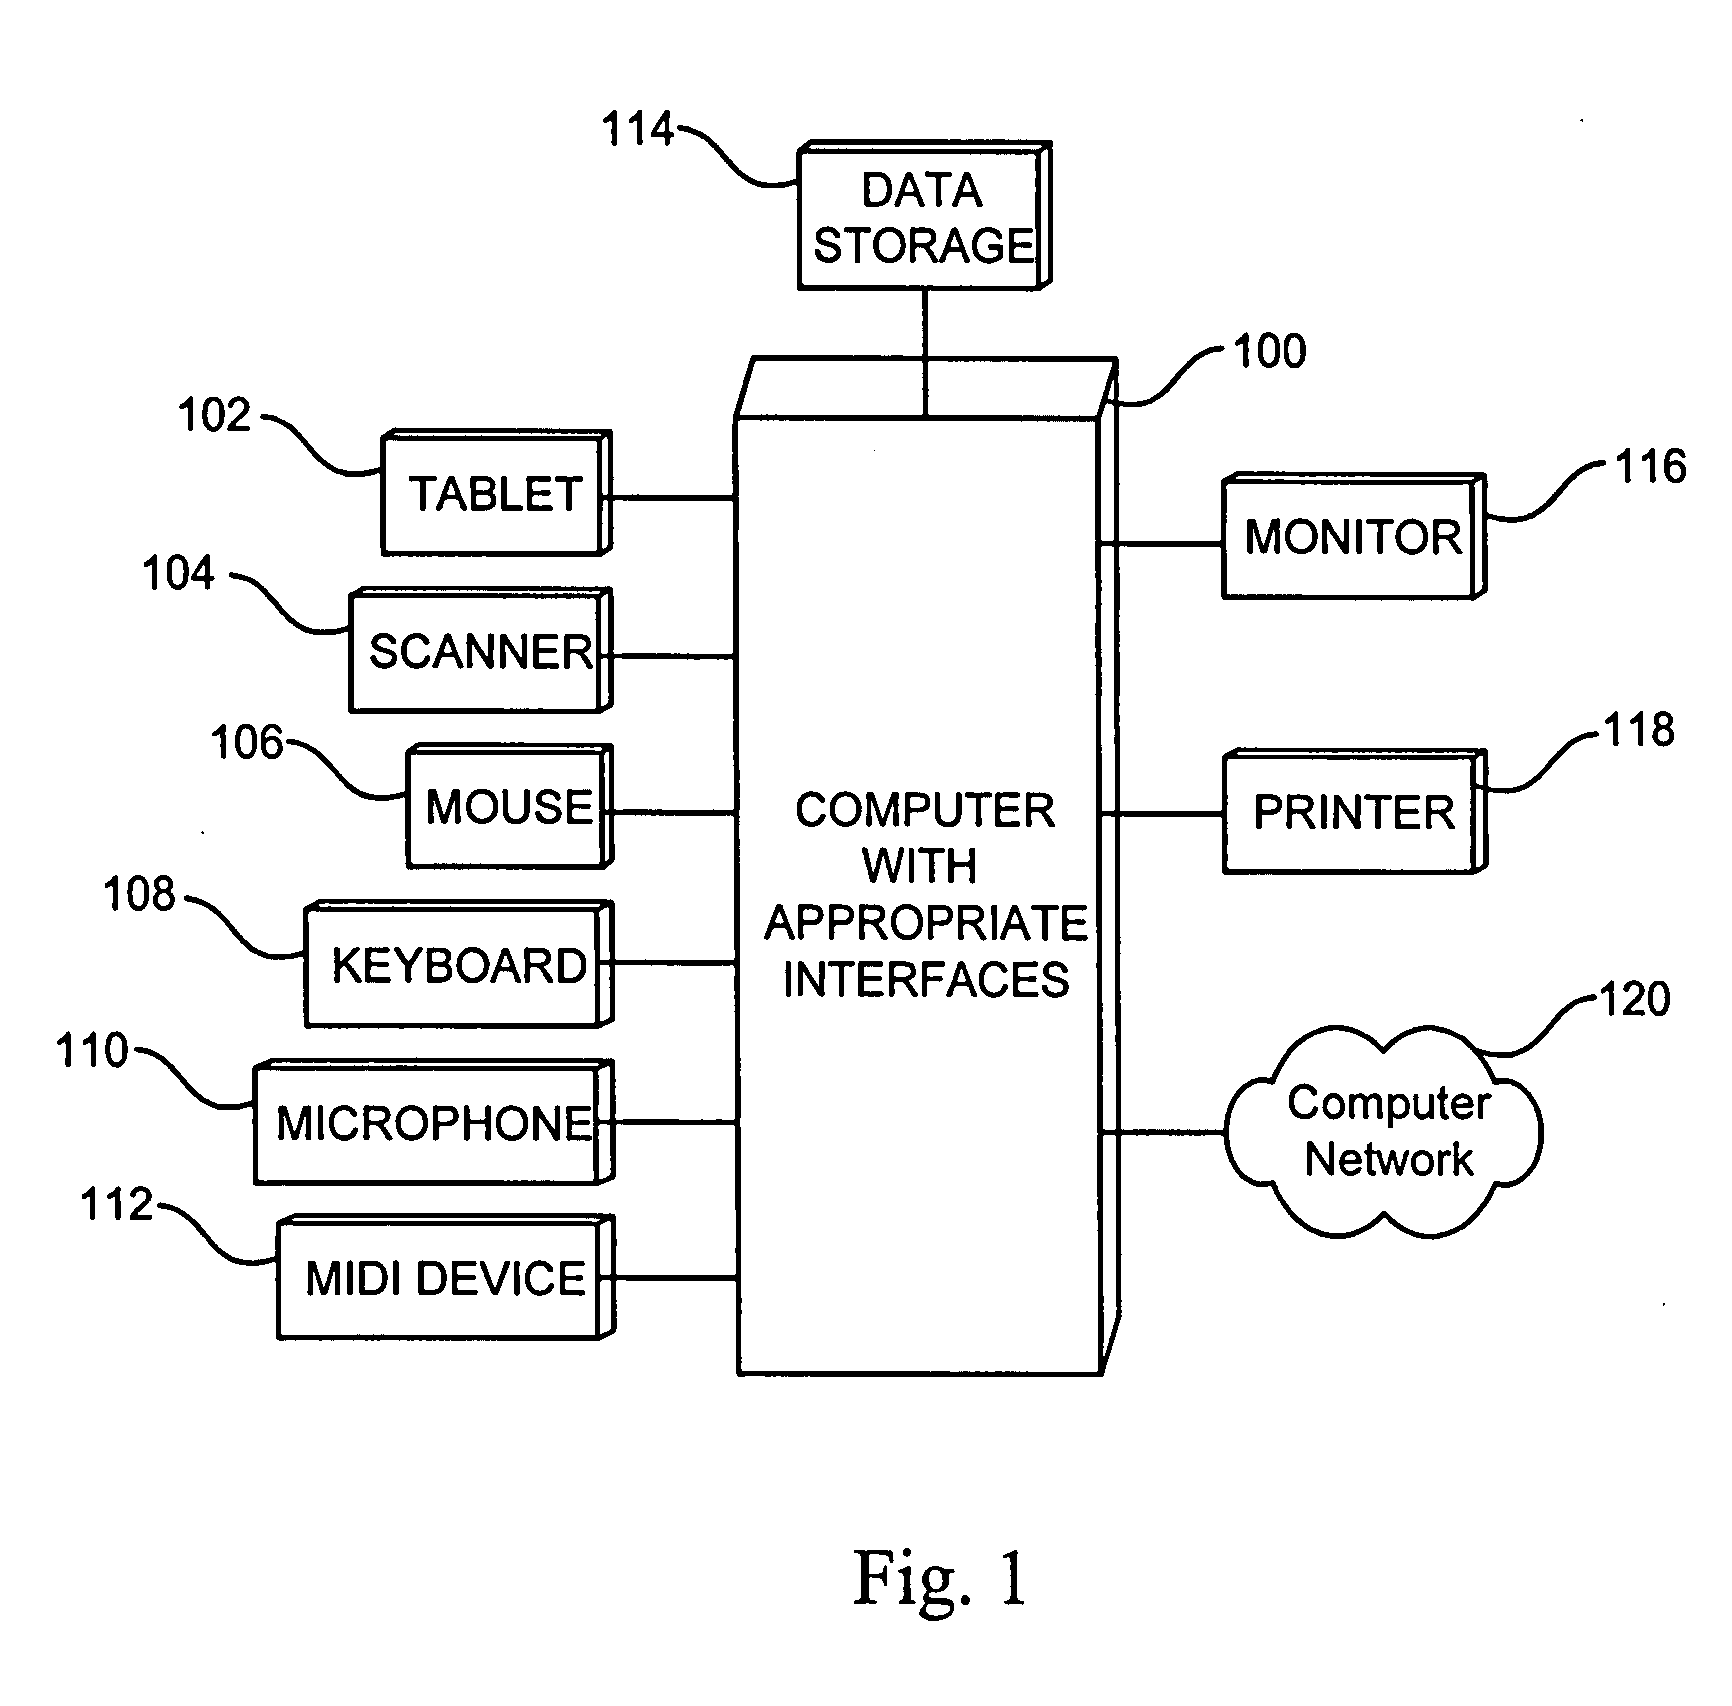 Method of automated musical instrument finger finding